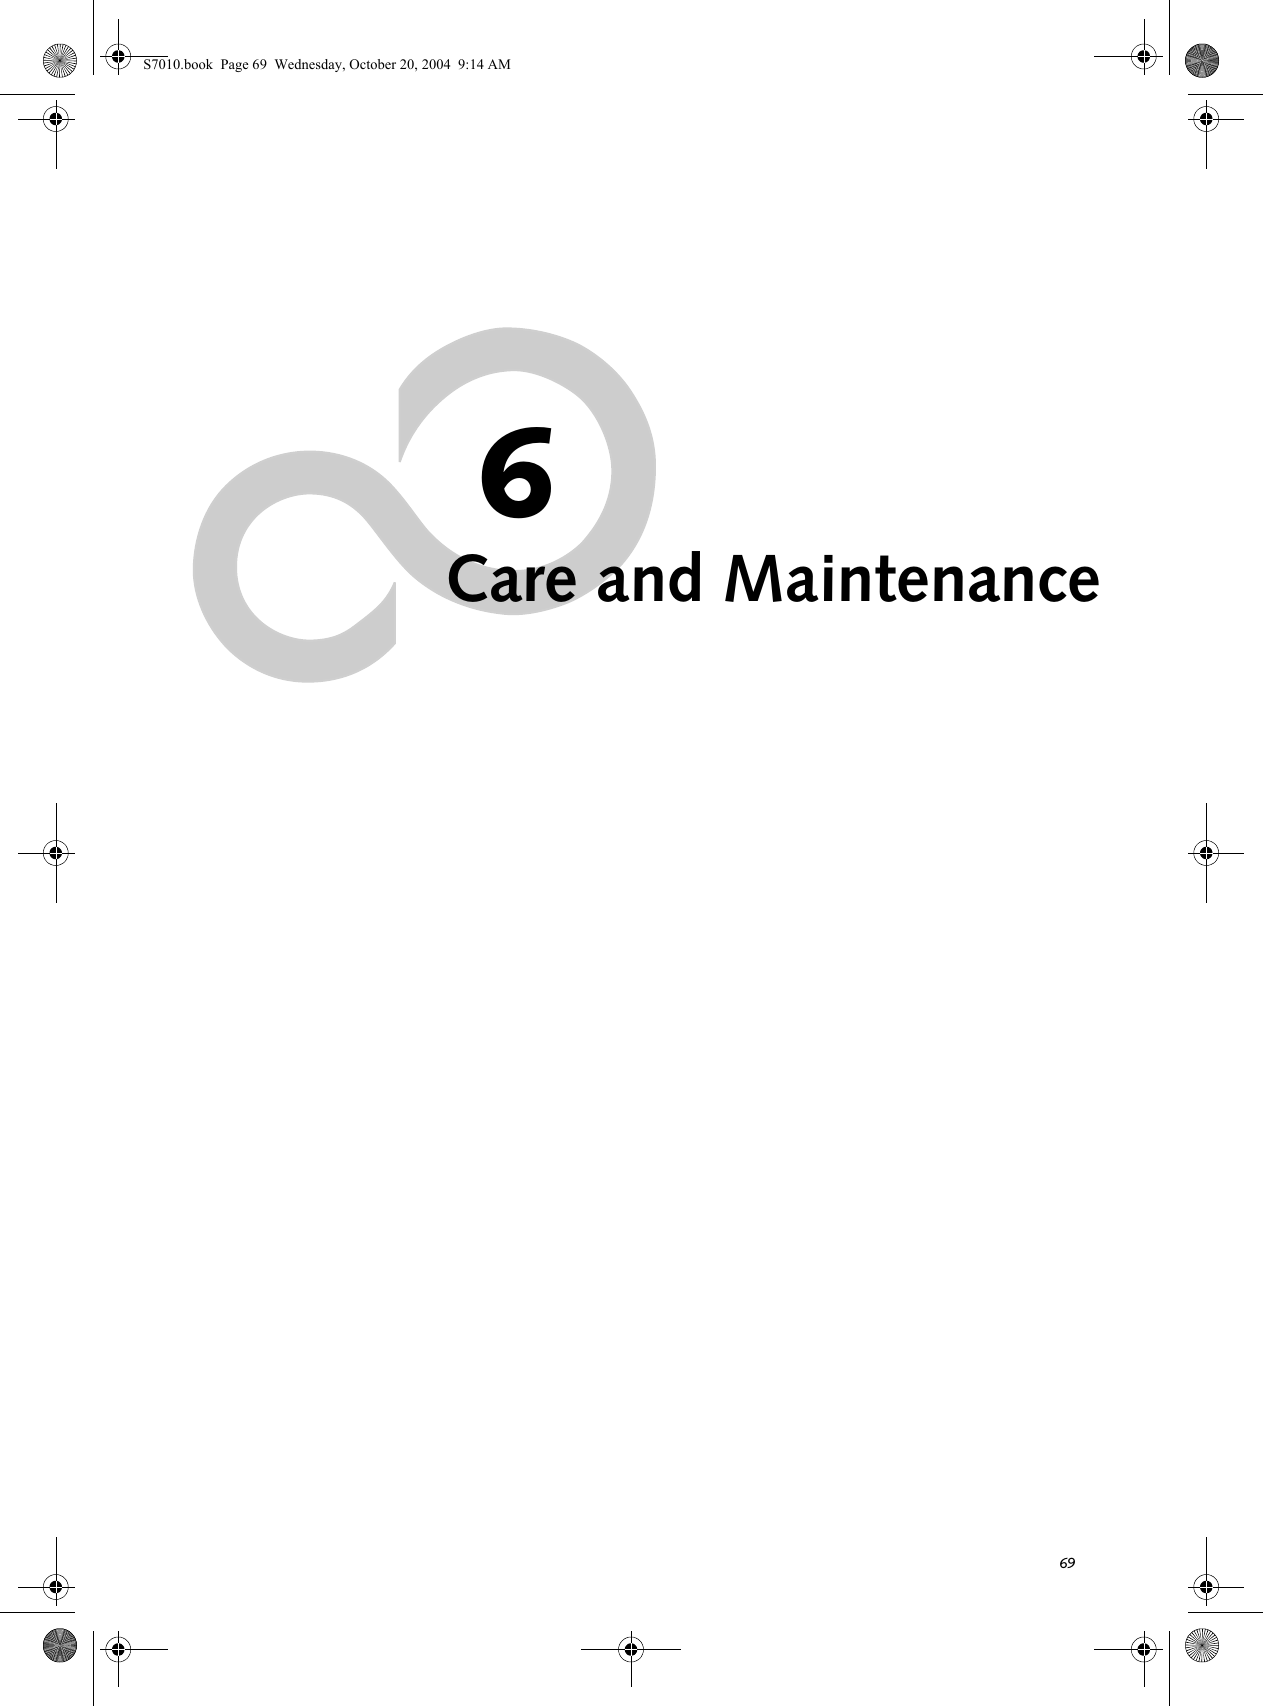 696Care and MaintenanceS7010.book  Page 69  Wednesday, October 20, 2004  9:14 AM